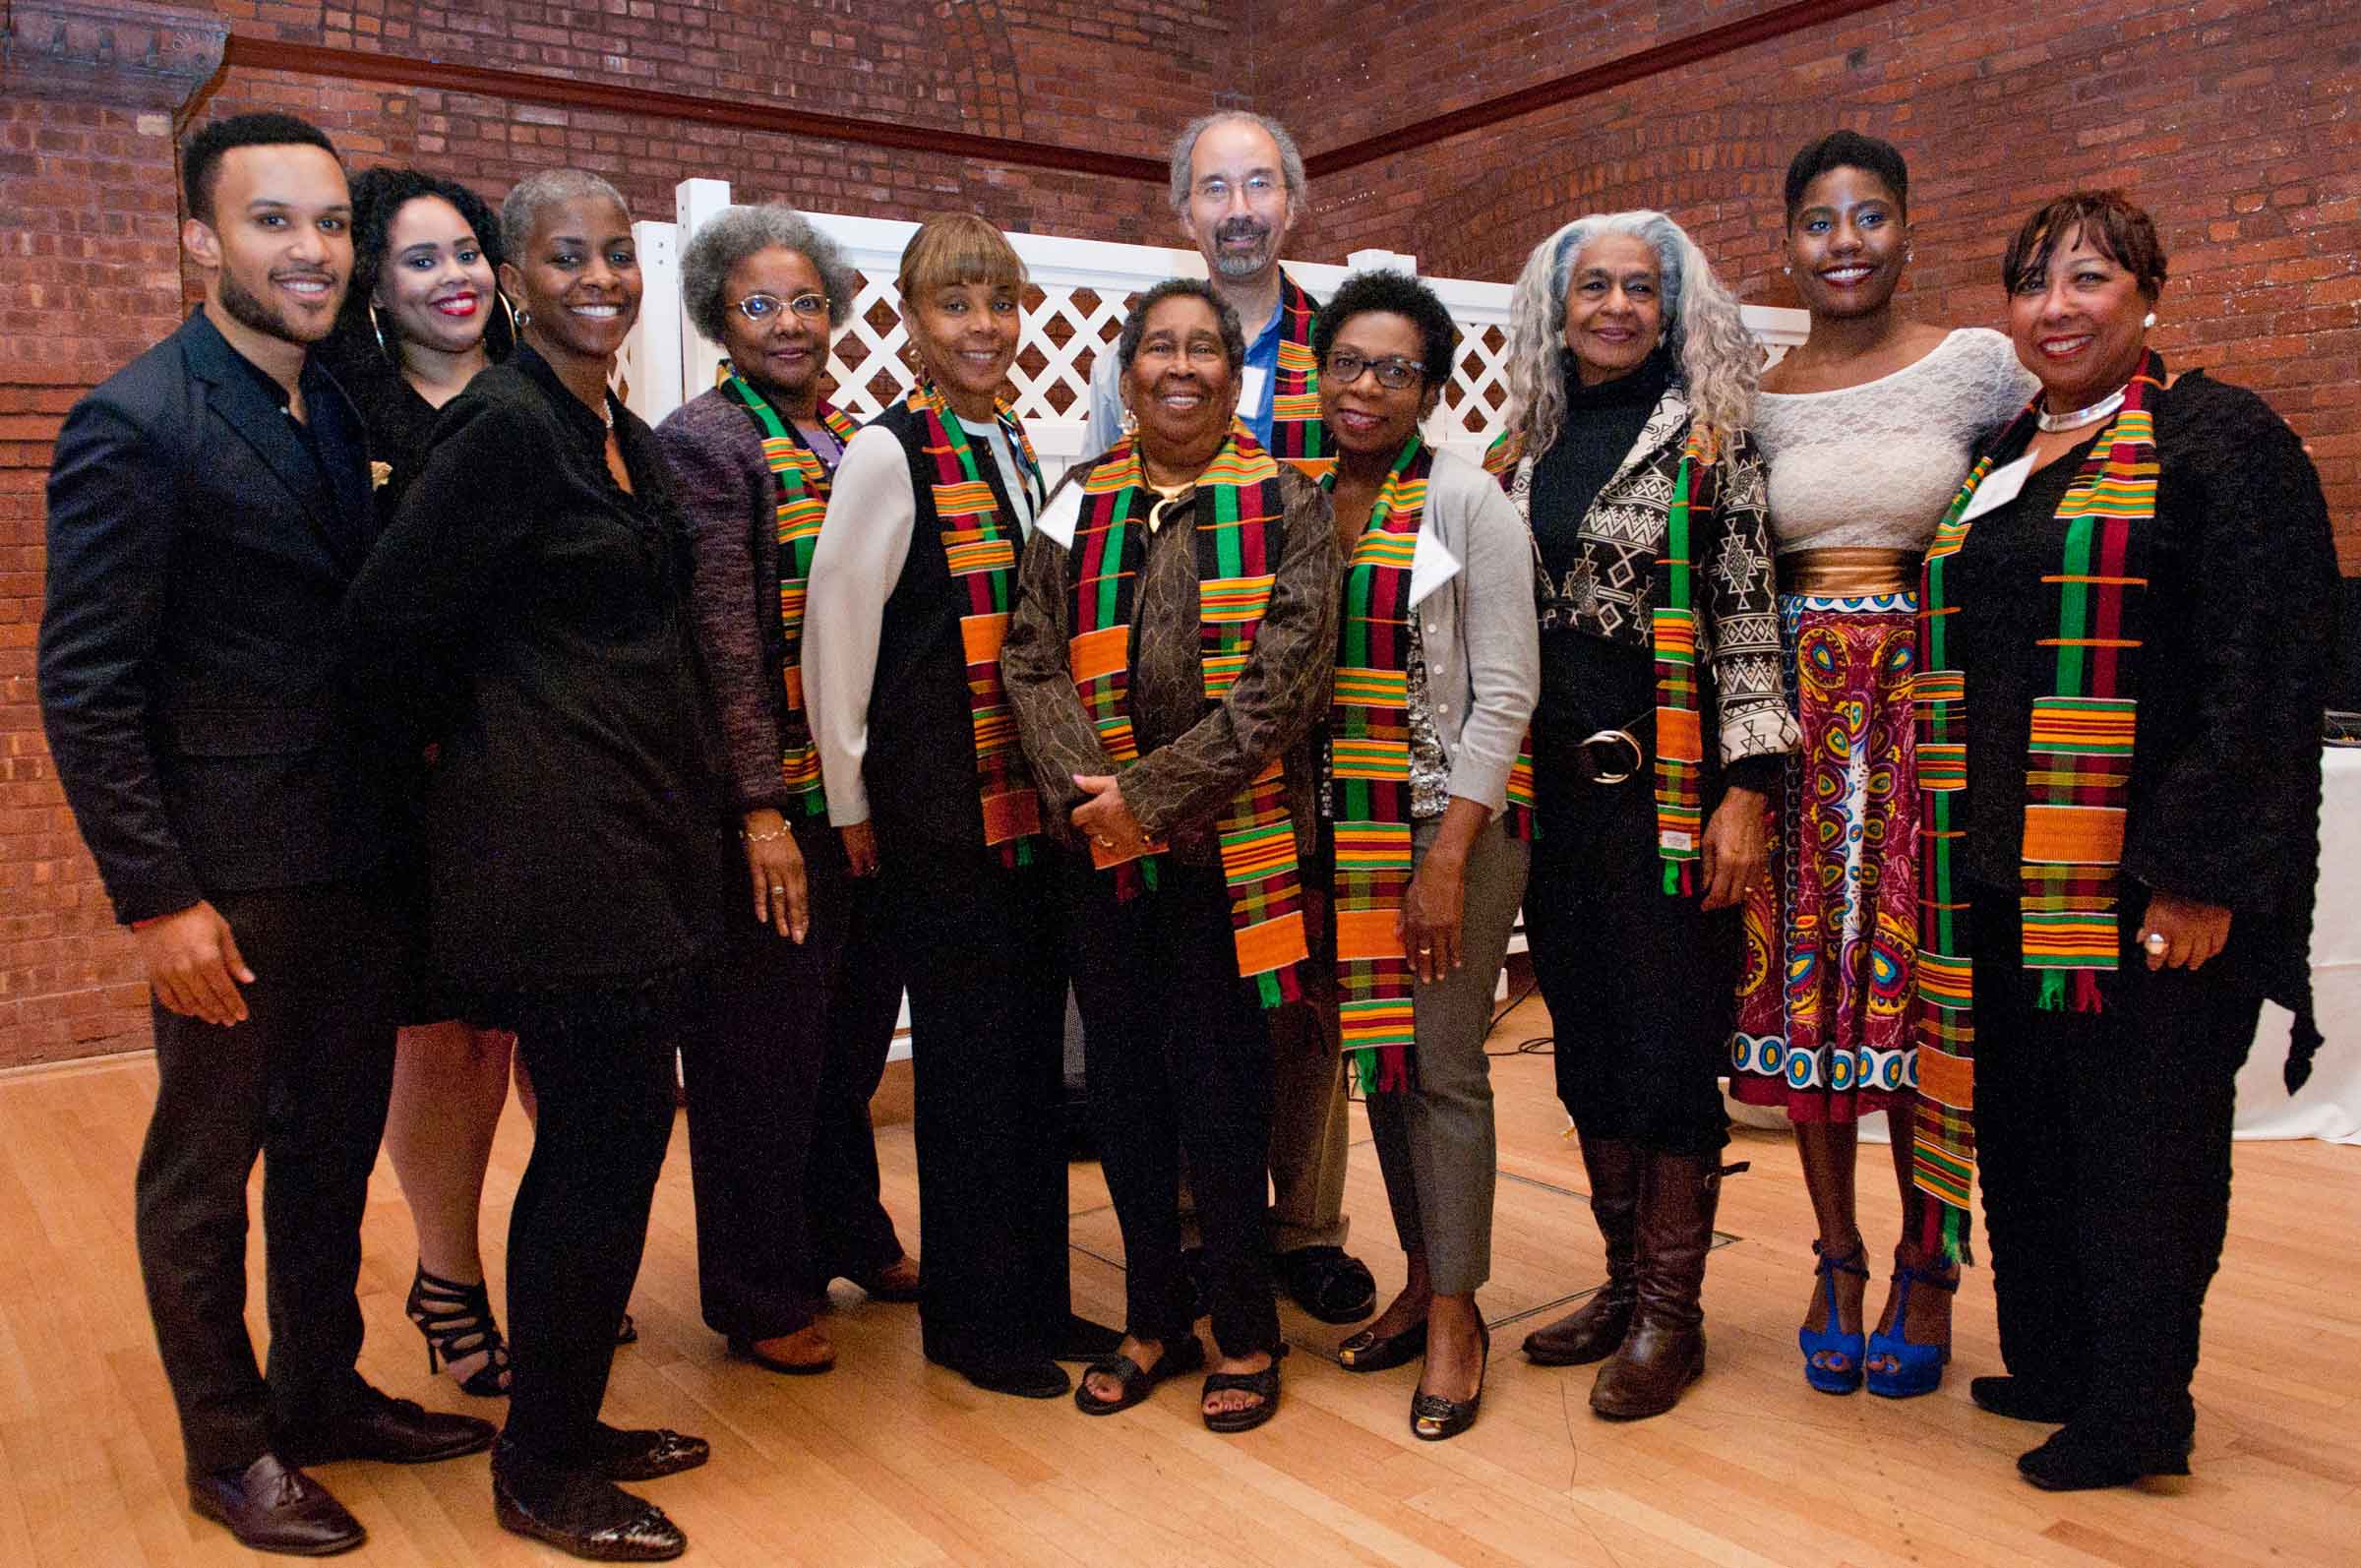 Group of people standing and smiling, some wearing kente cloths over their shoulder.